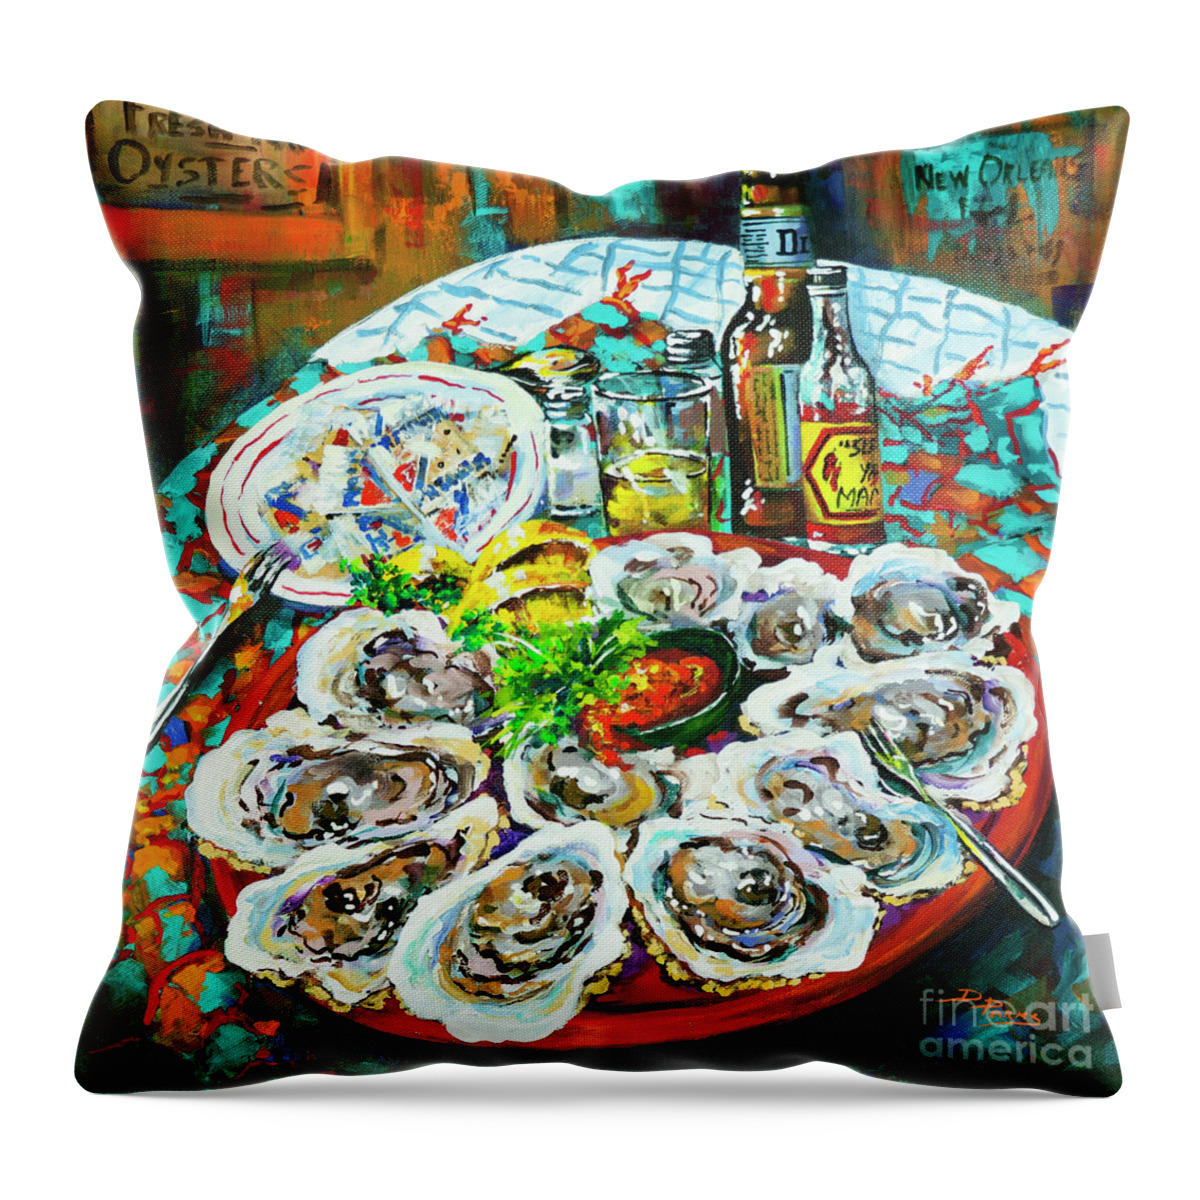 New Orleans Art Throw Pillow featuring the painting Slap dem Oysters by Dianne Parks